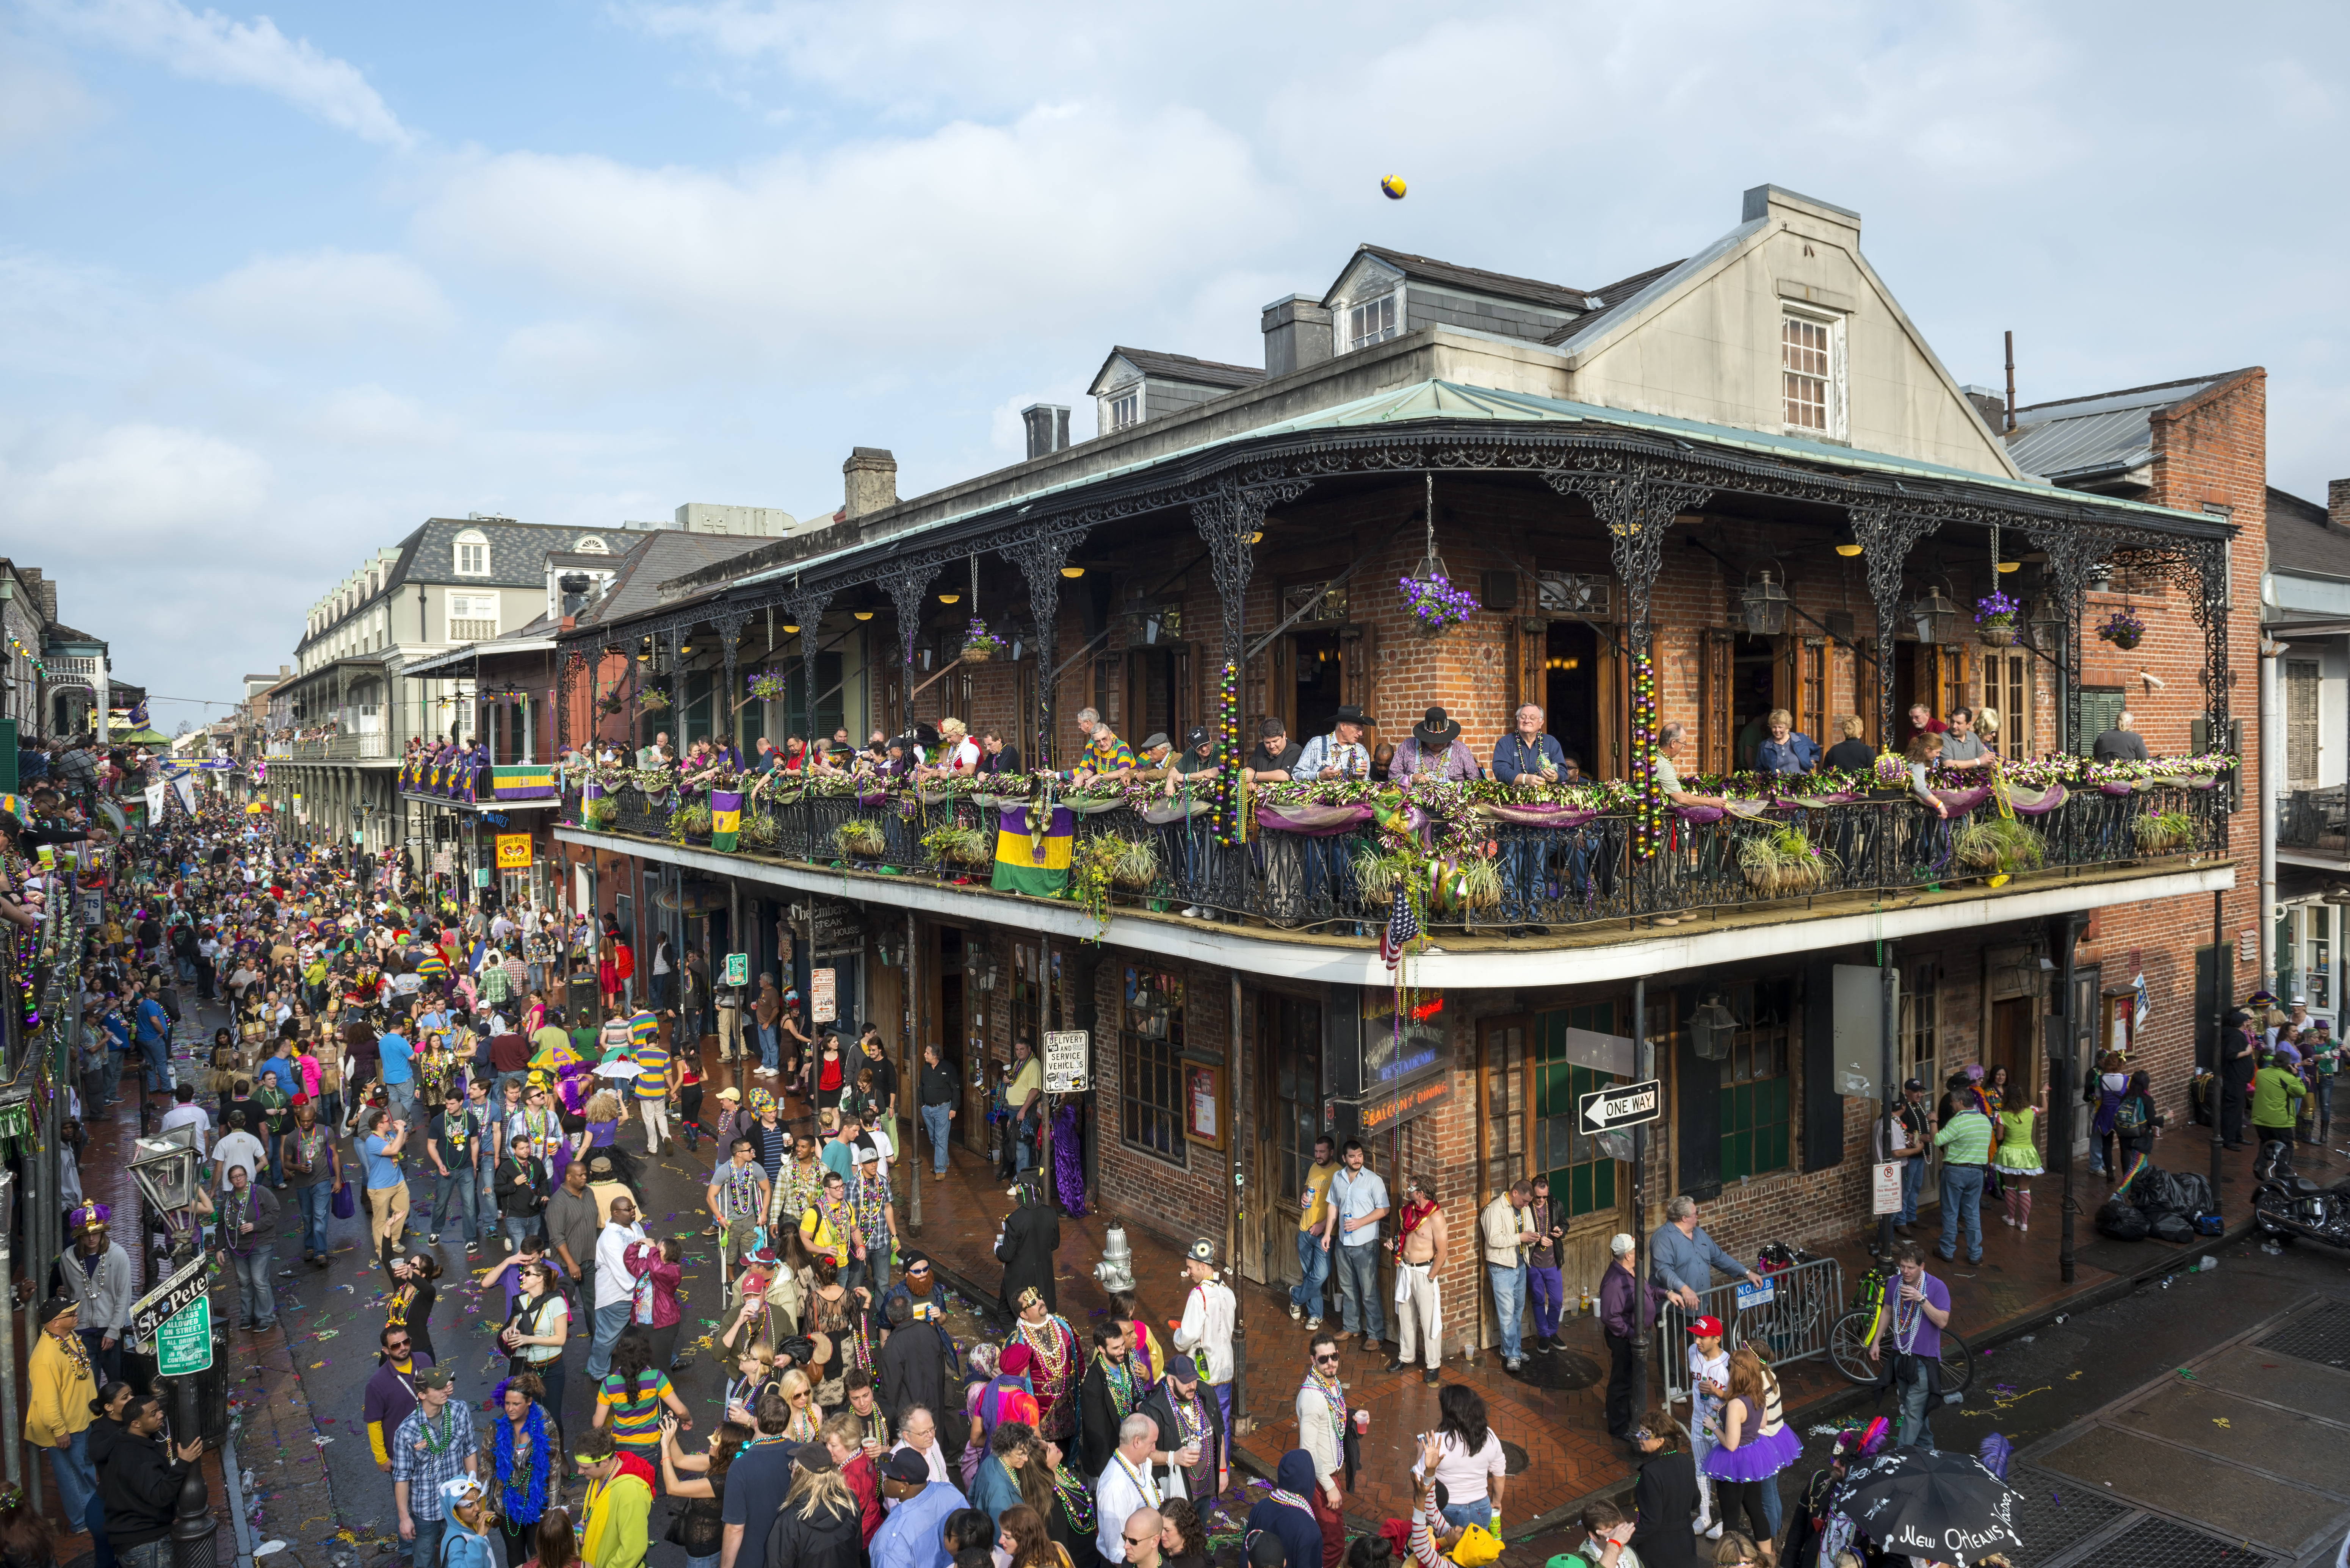 A two-story building with wraparound porches on both levels; crows of peopled around it on the street, celebrating Mardi Gras. 